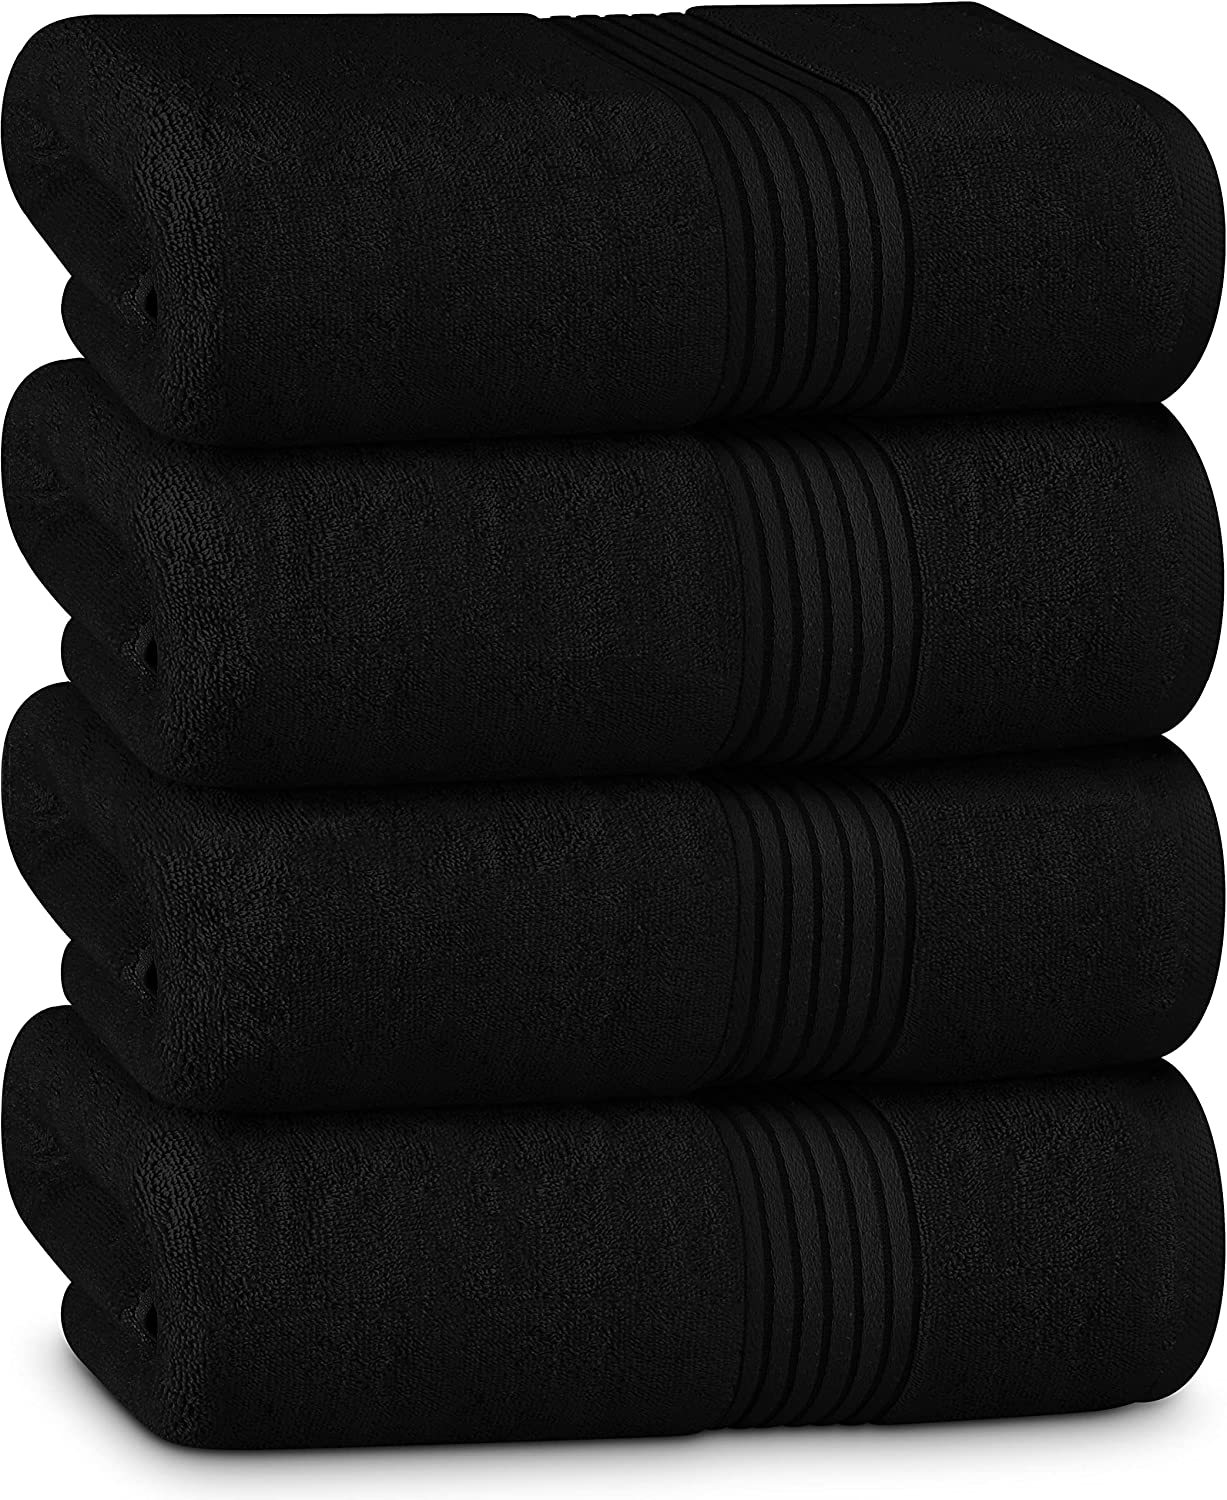 Utopia Towels 4 Piece Hand Towels Set, (16 x 28 inches) 100% Ring